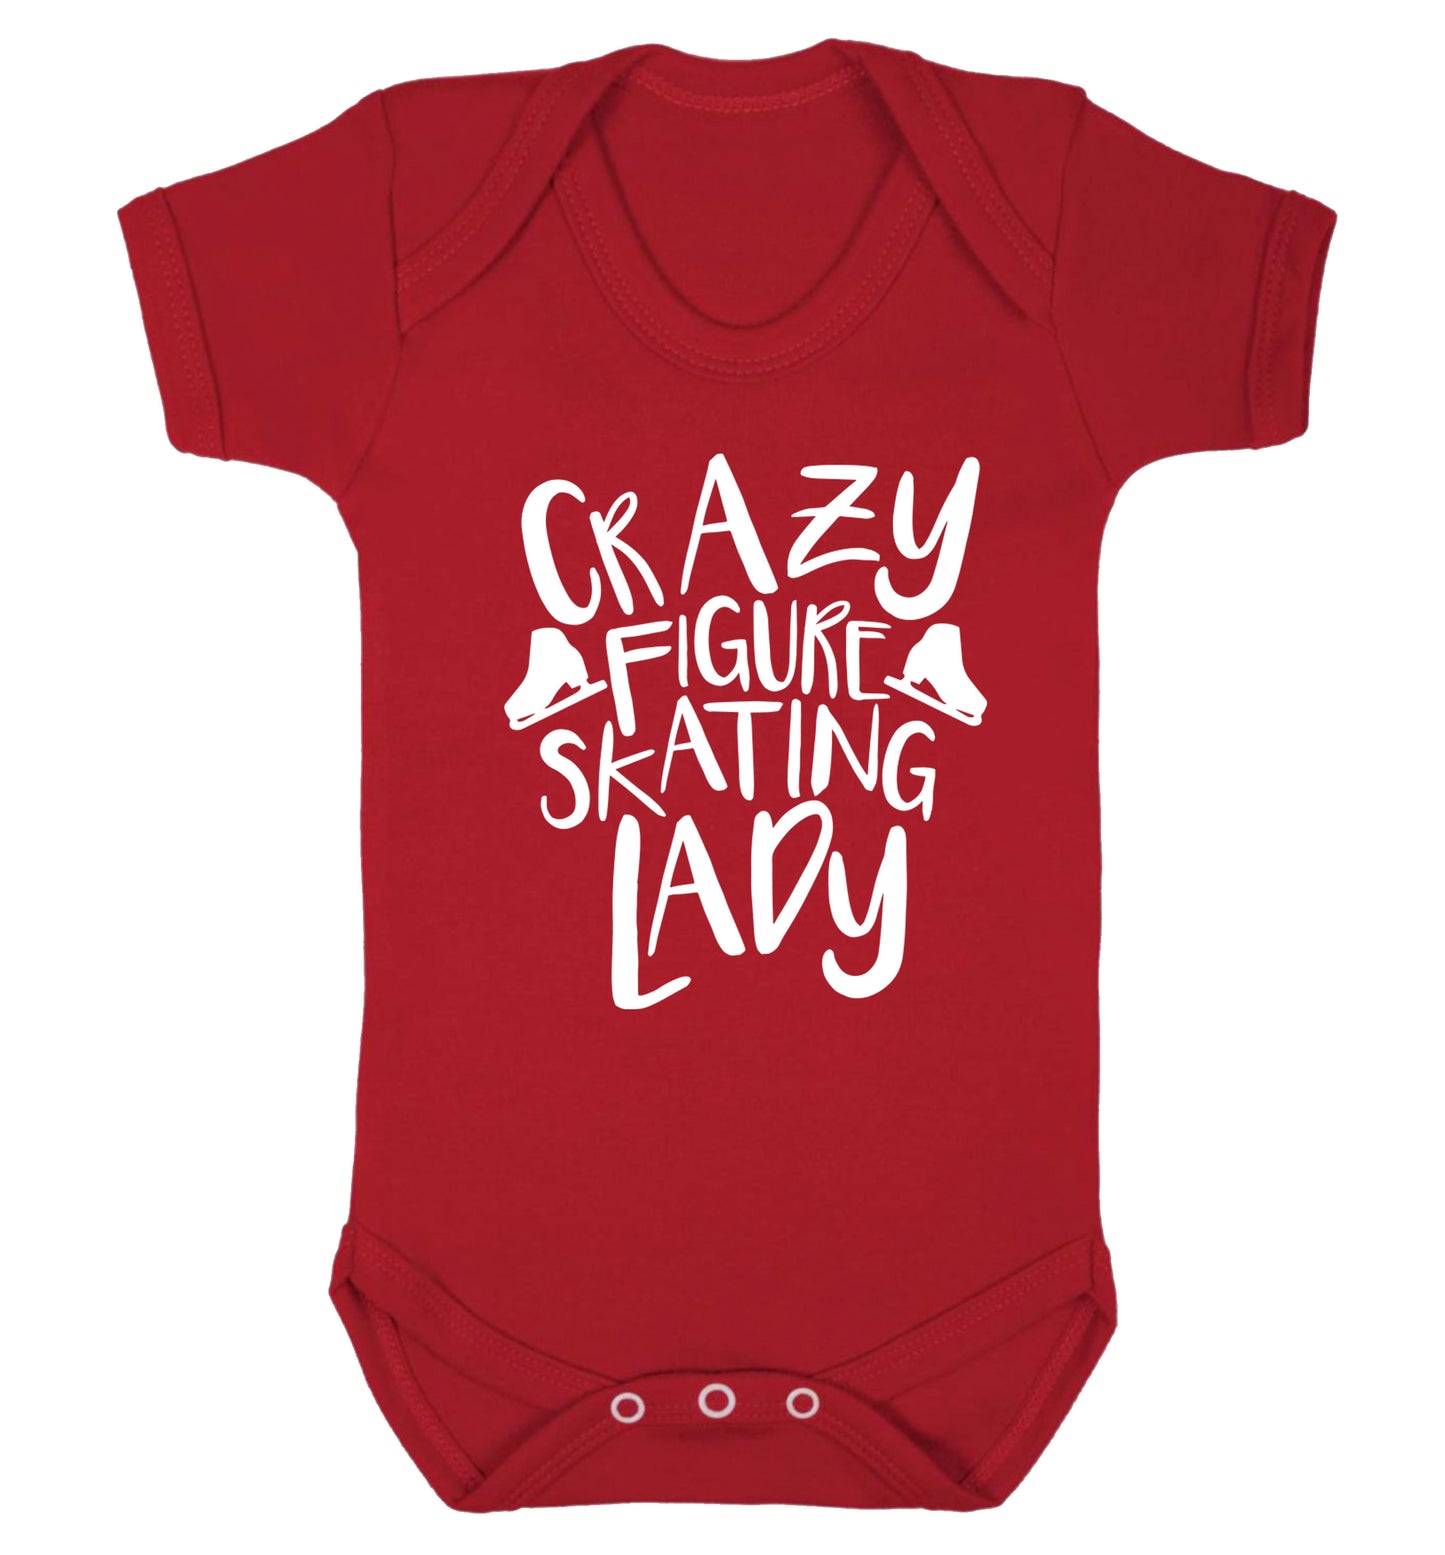 Crazy figure skating lady Baby Vest red 18-24 months